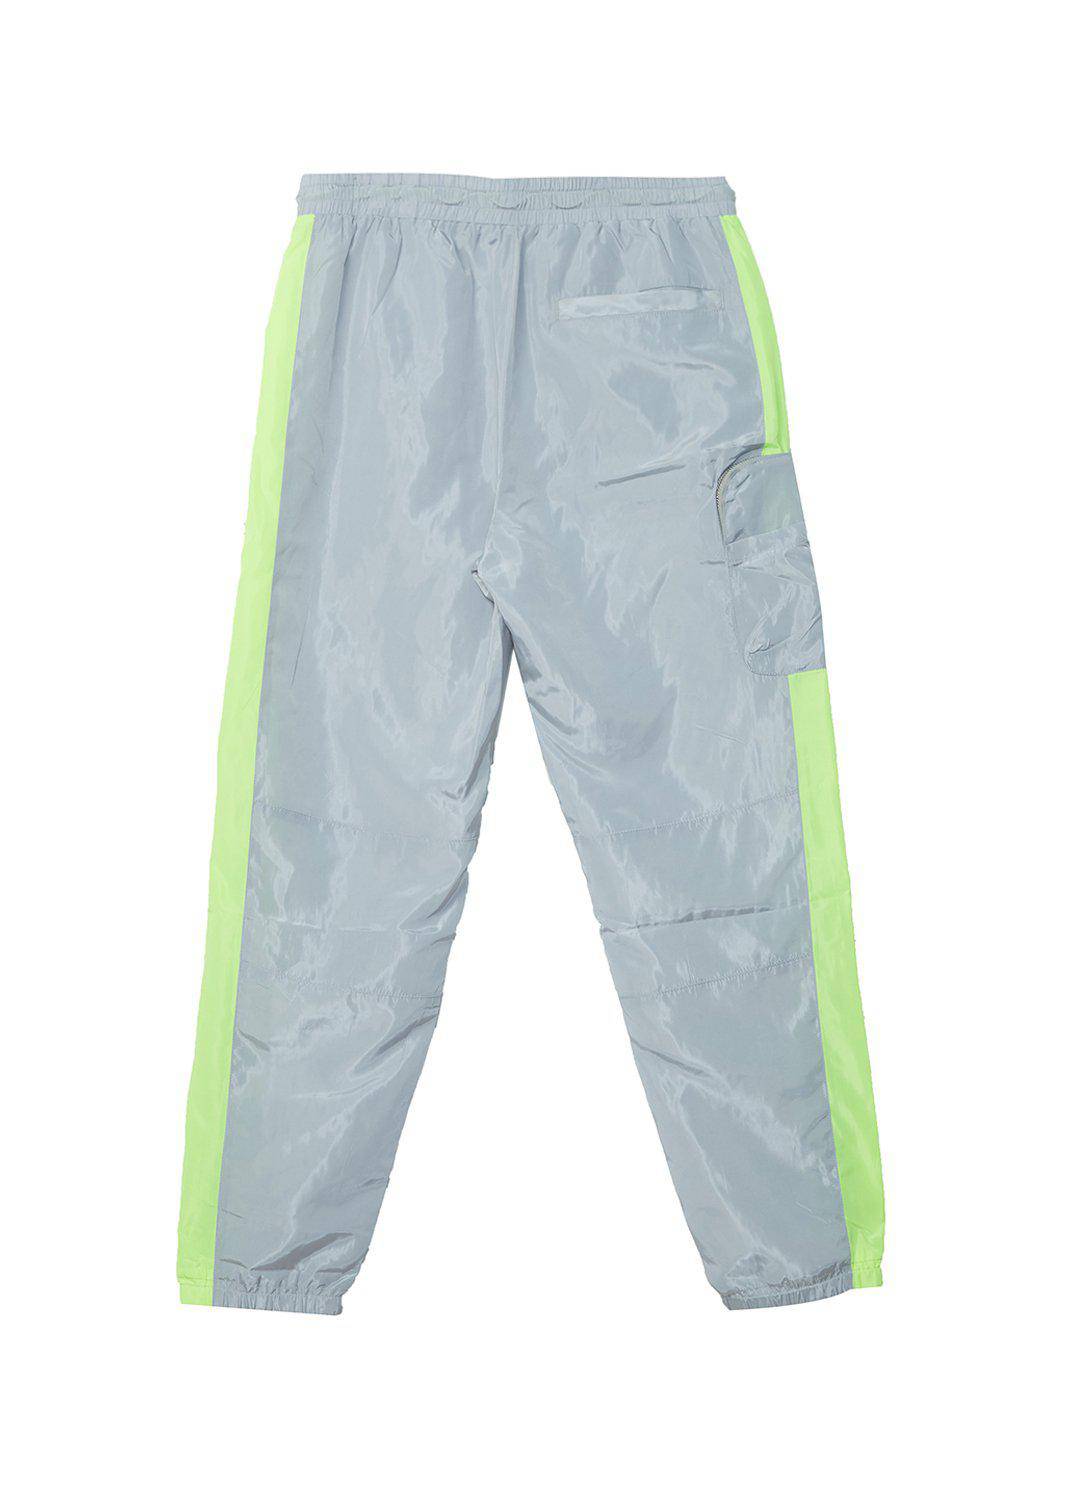 Blank State Men's X1 Cargo Pants in Grey[Reflective]